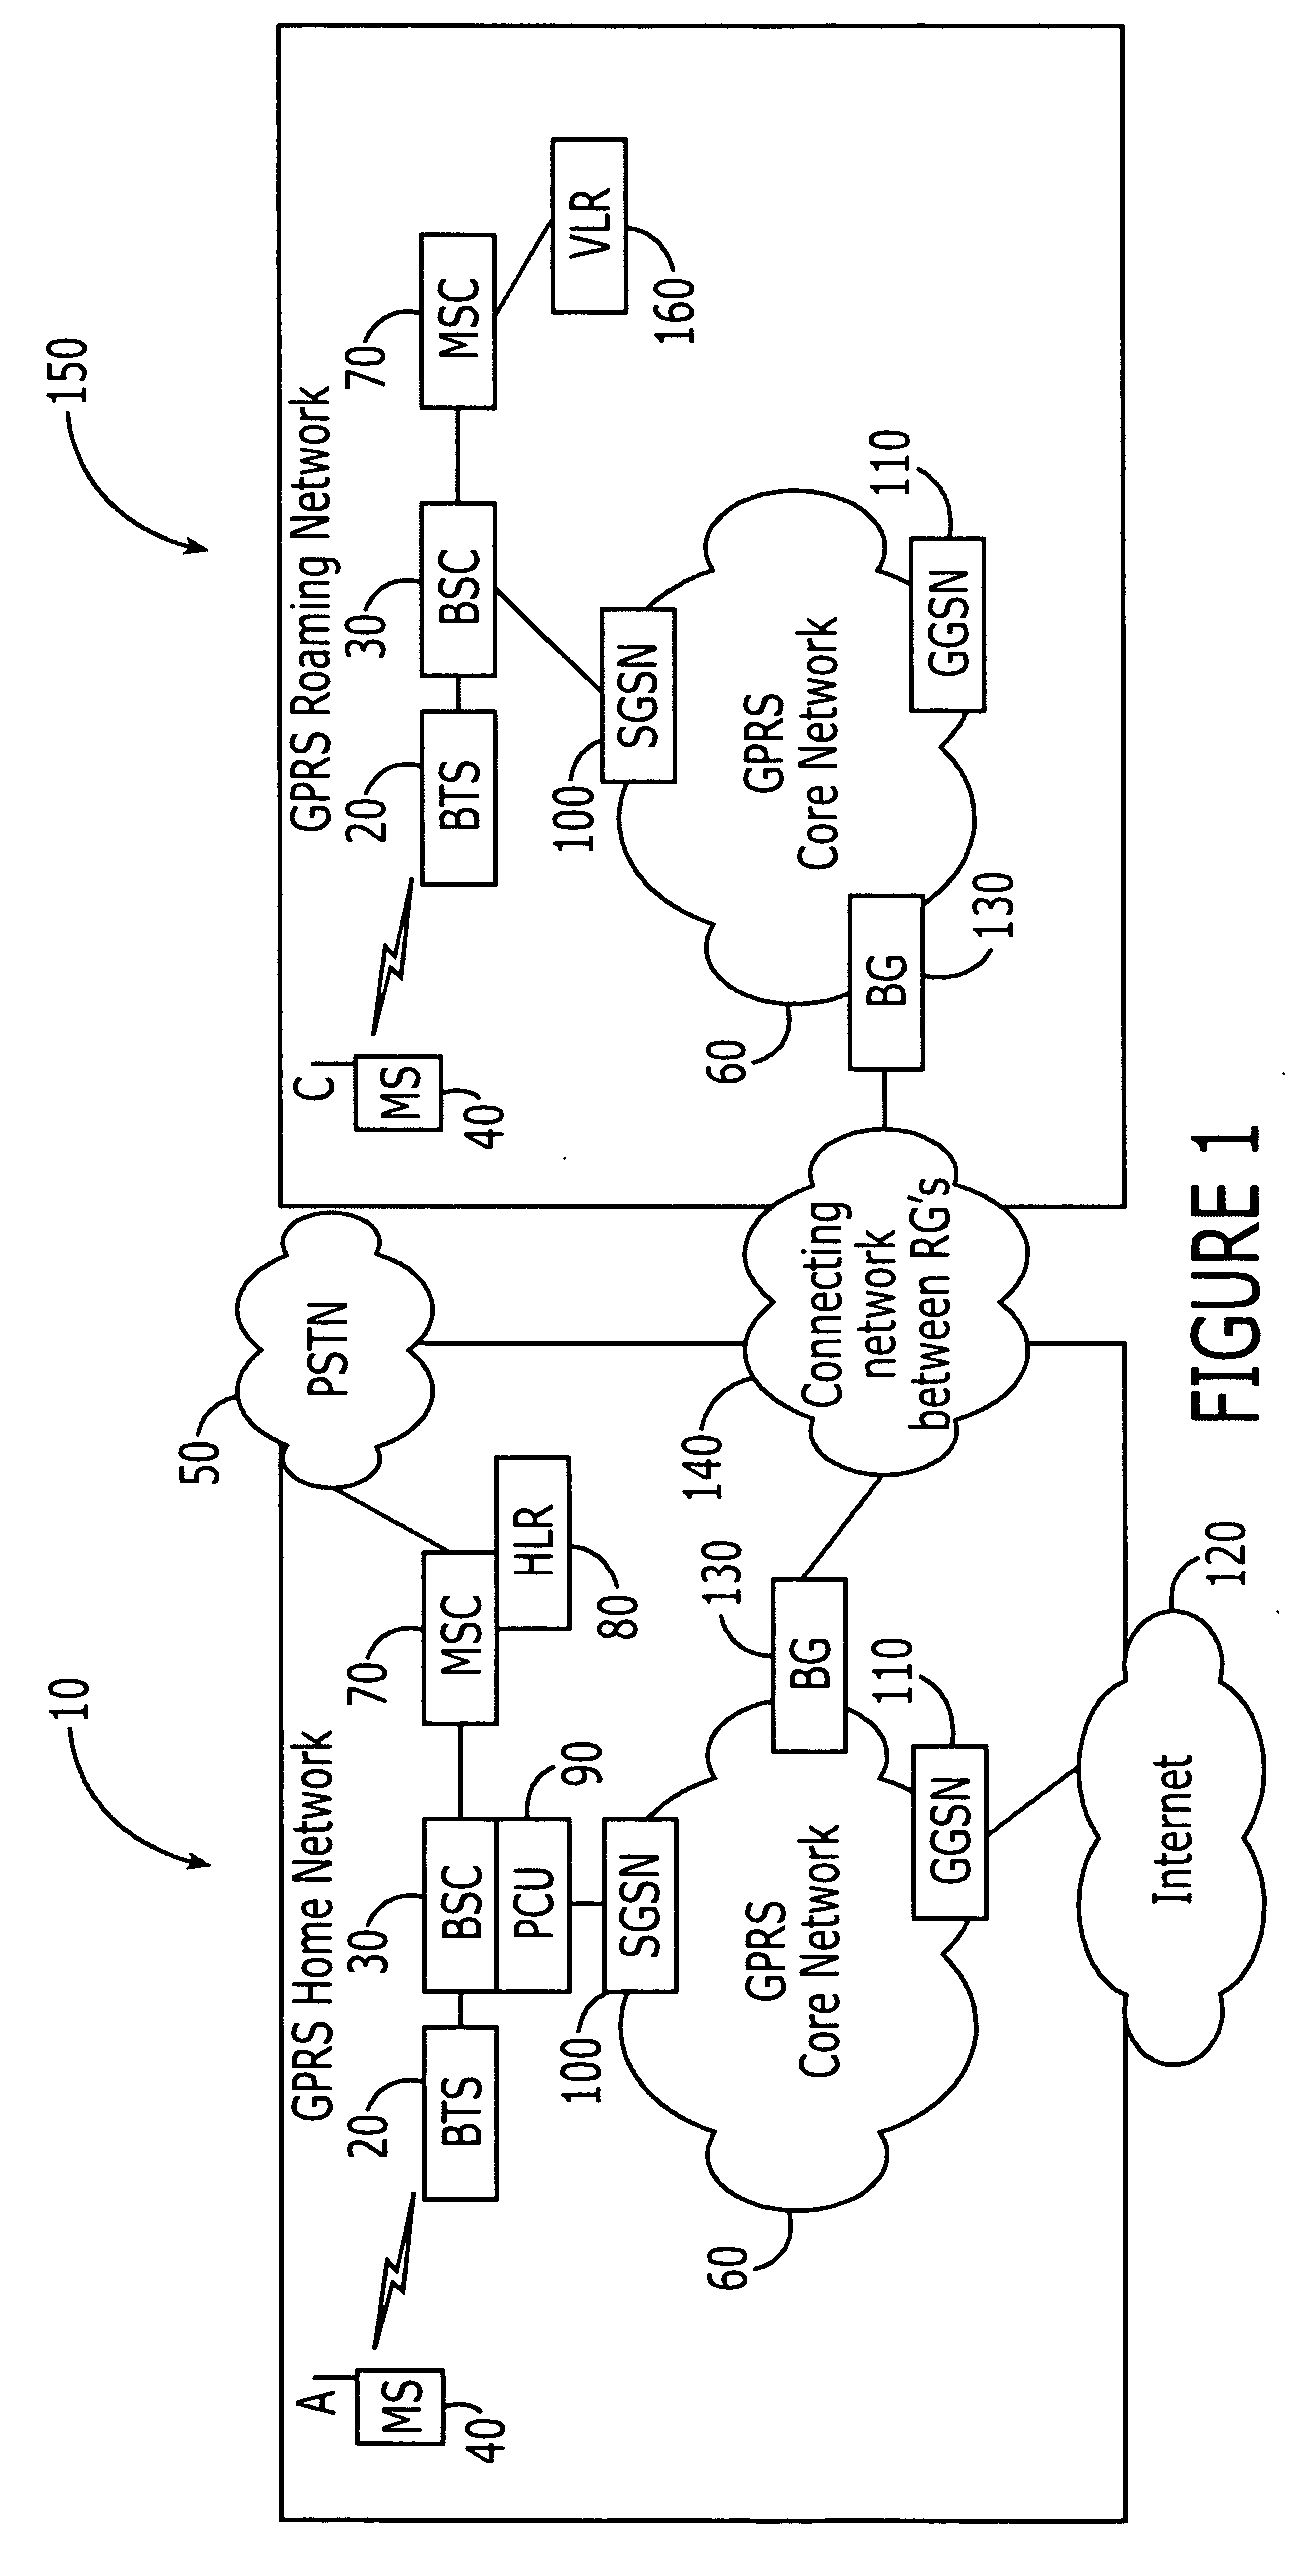 Systems, devices, methods and computer program products for downloading content to mobile devices in a roaming environment